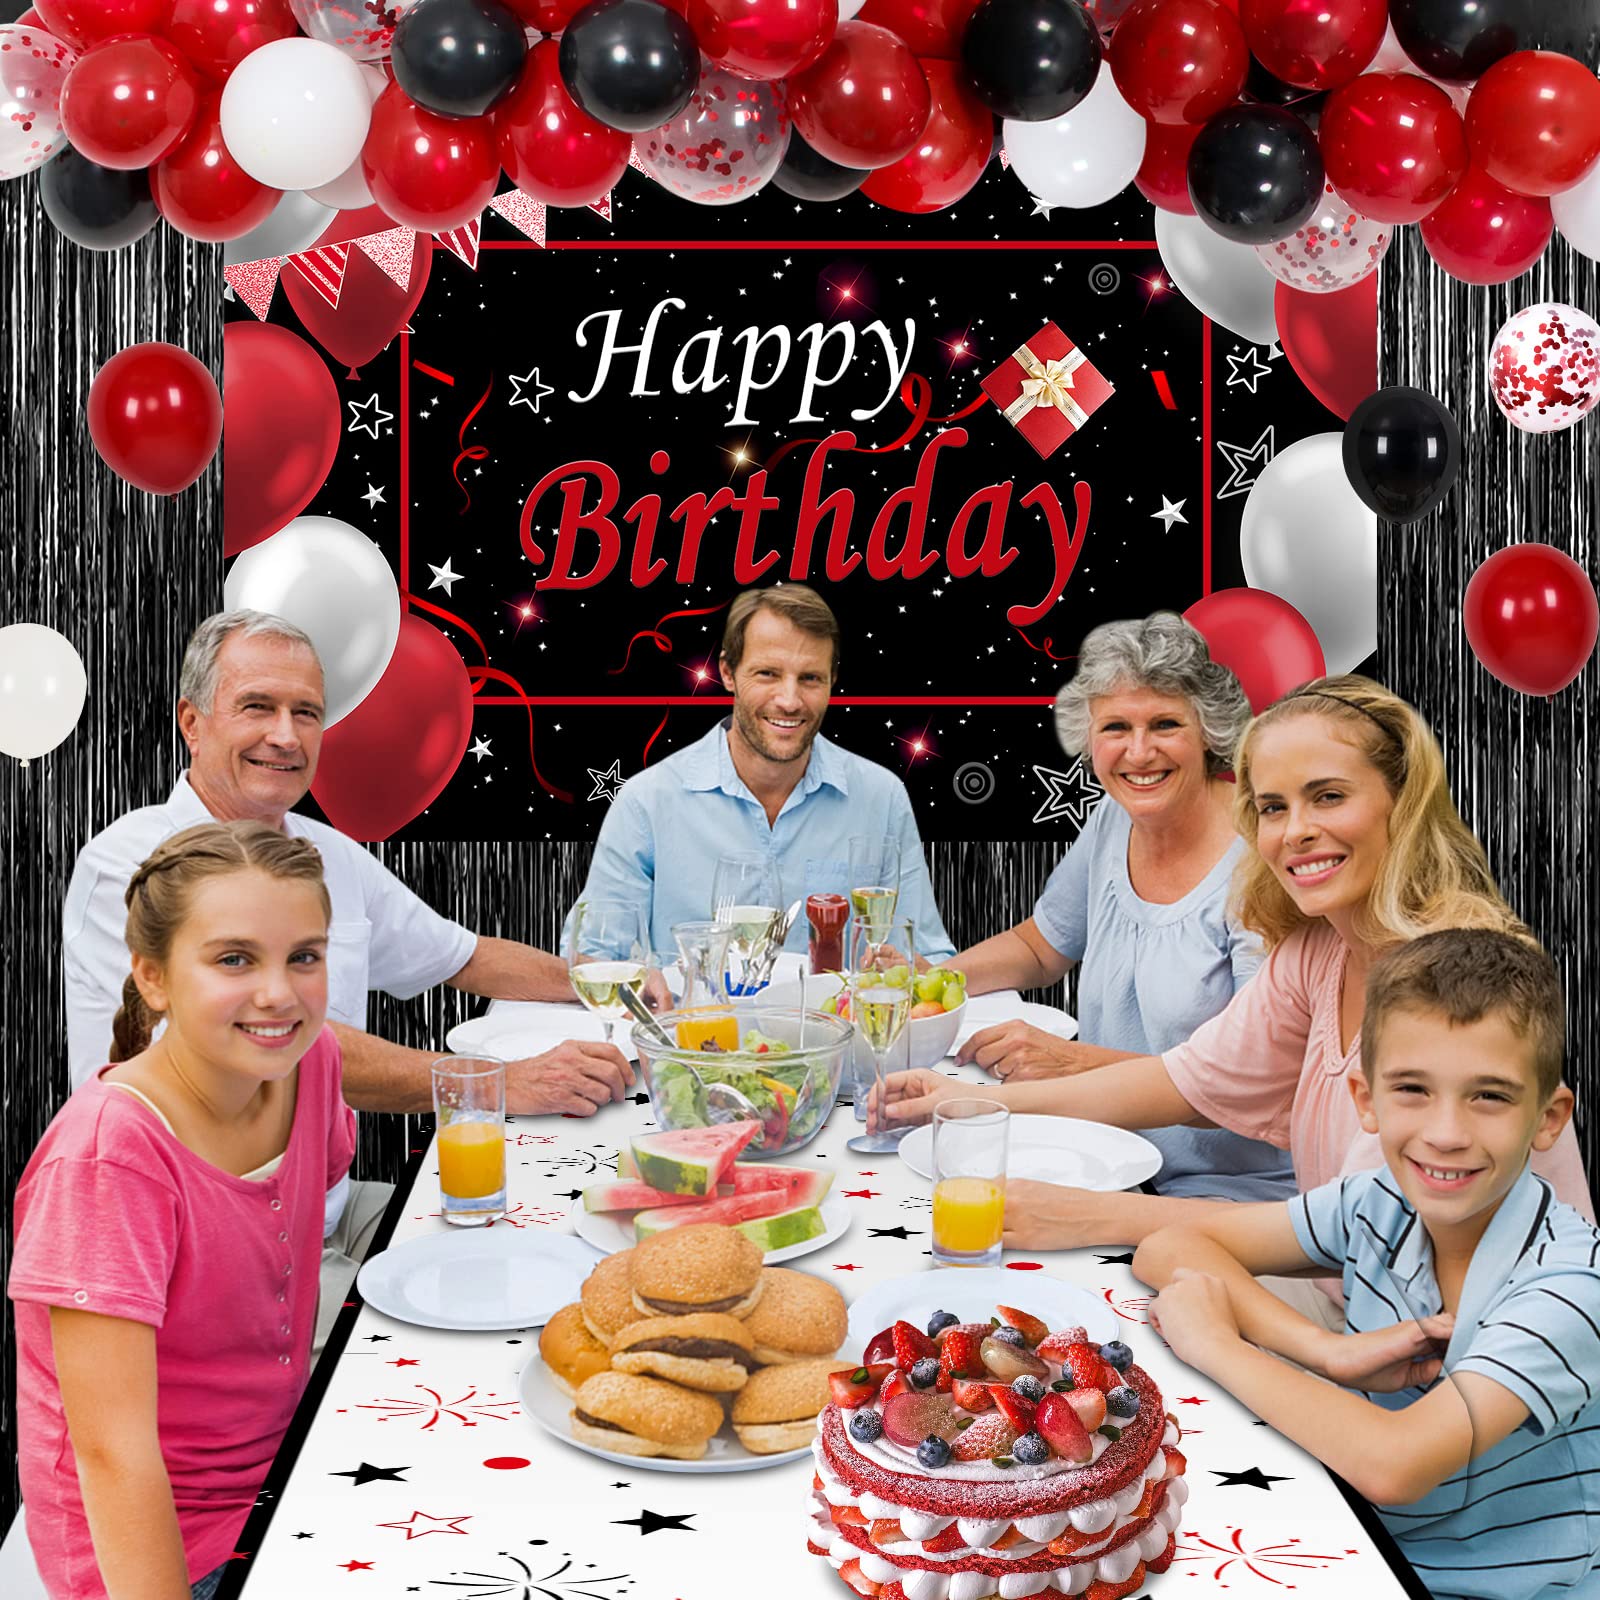 Red and Black Birthday Decorations for Men Women, Happy Birthday Decorations fo Boys Girls Party Decoration Backdrop & Tablecloth Balloons Arch Kit Confetti Balloons Foil Fringe Curtains Table Cover